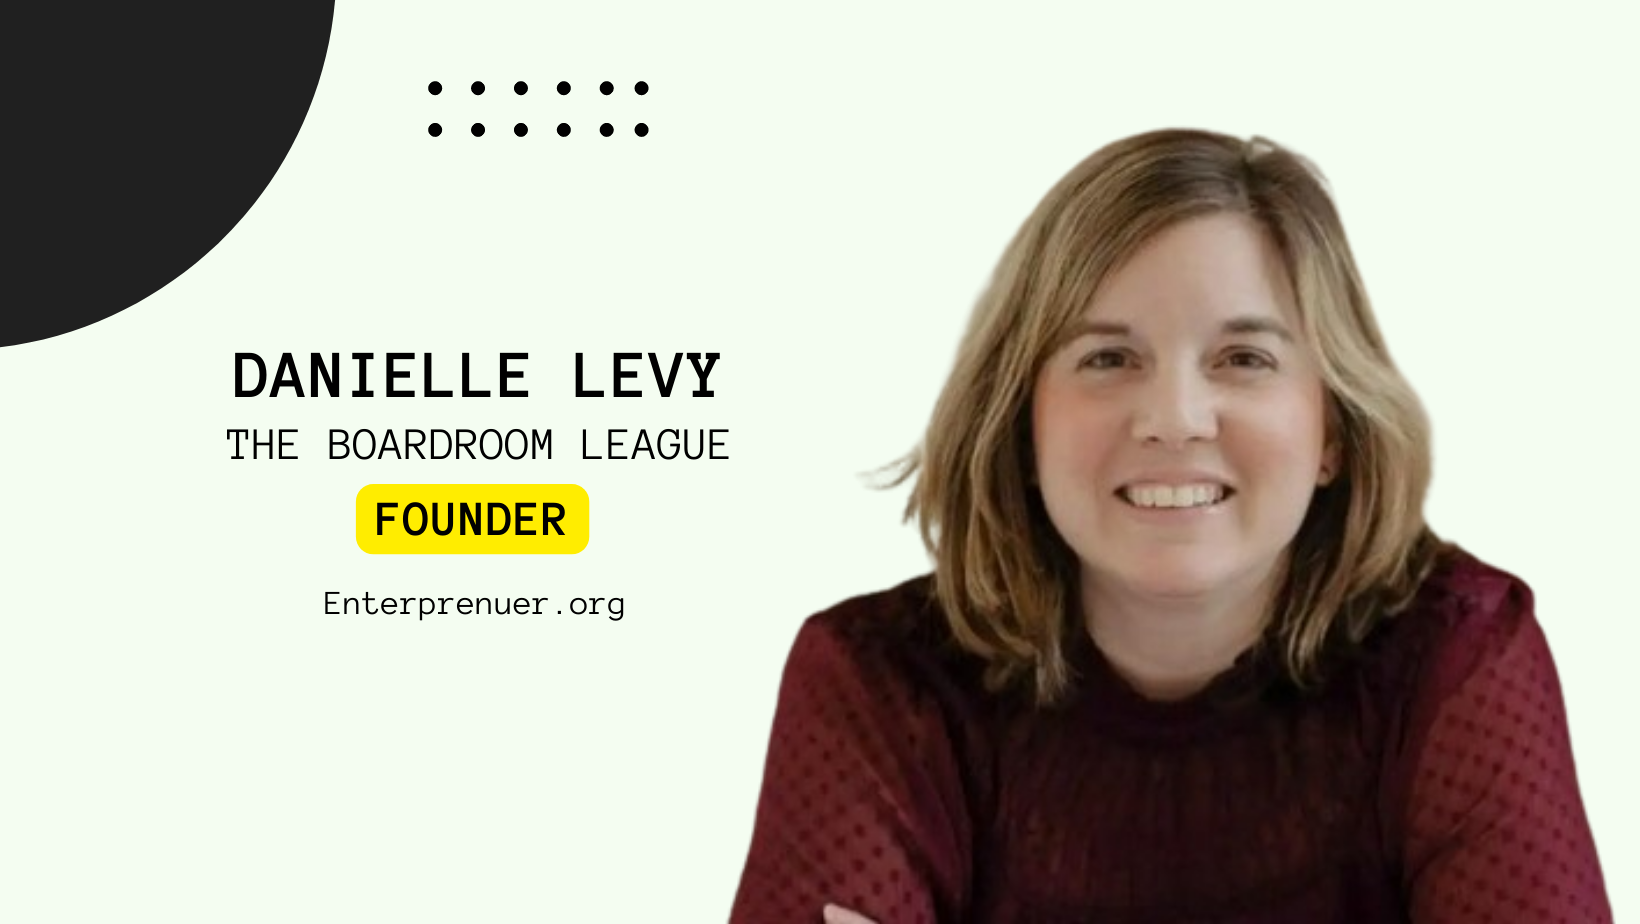 Danielle Levy Founder of The Boardroom League